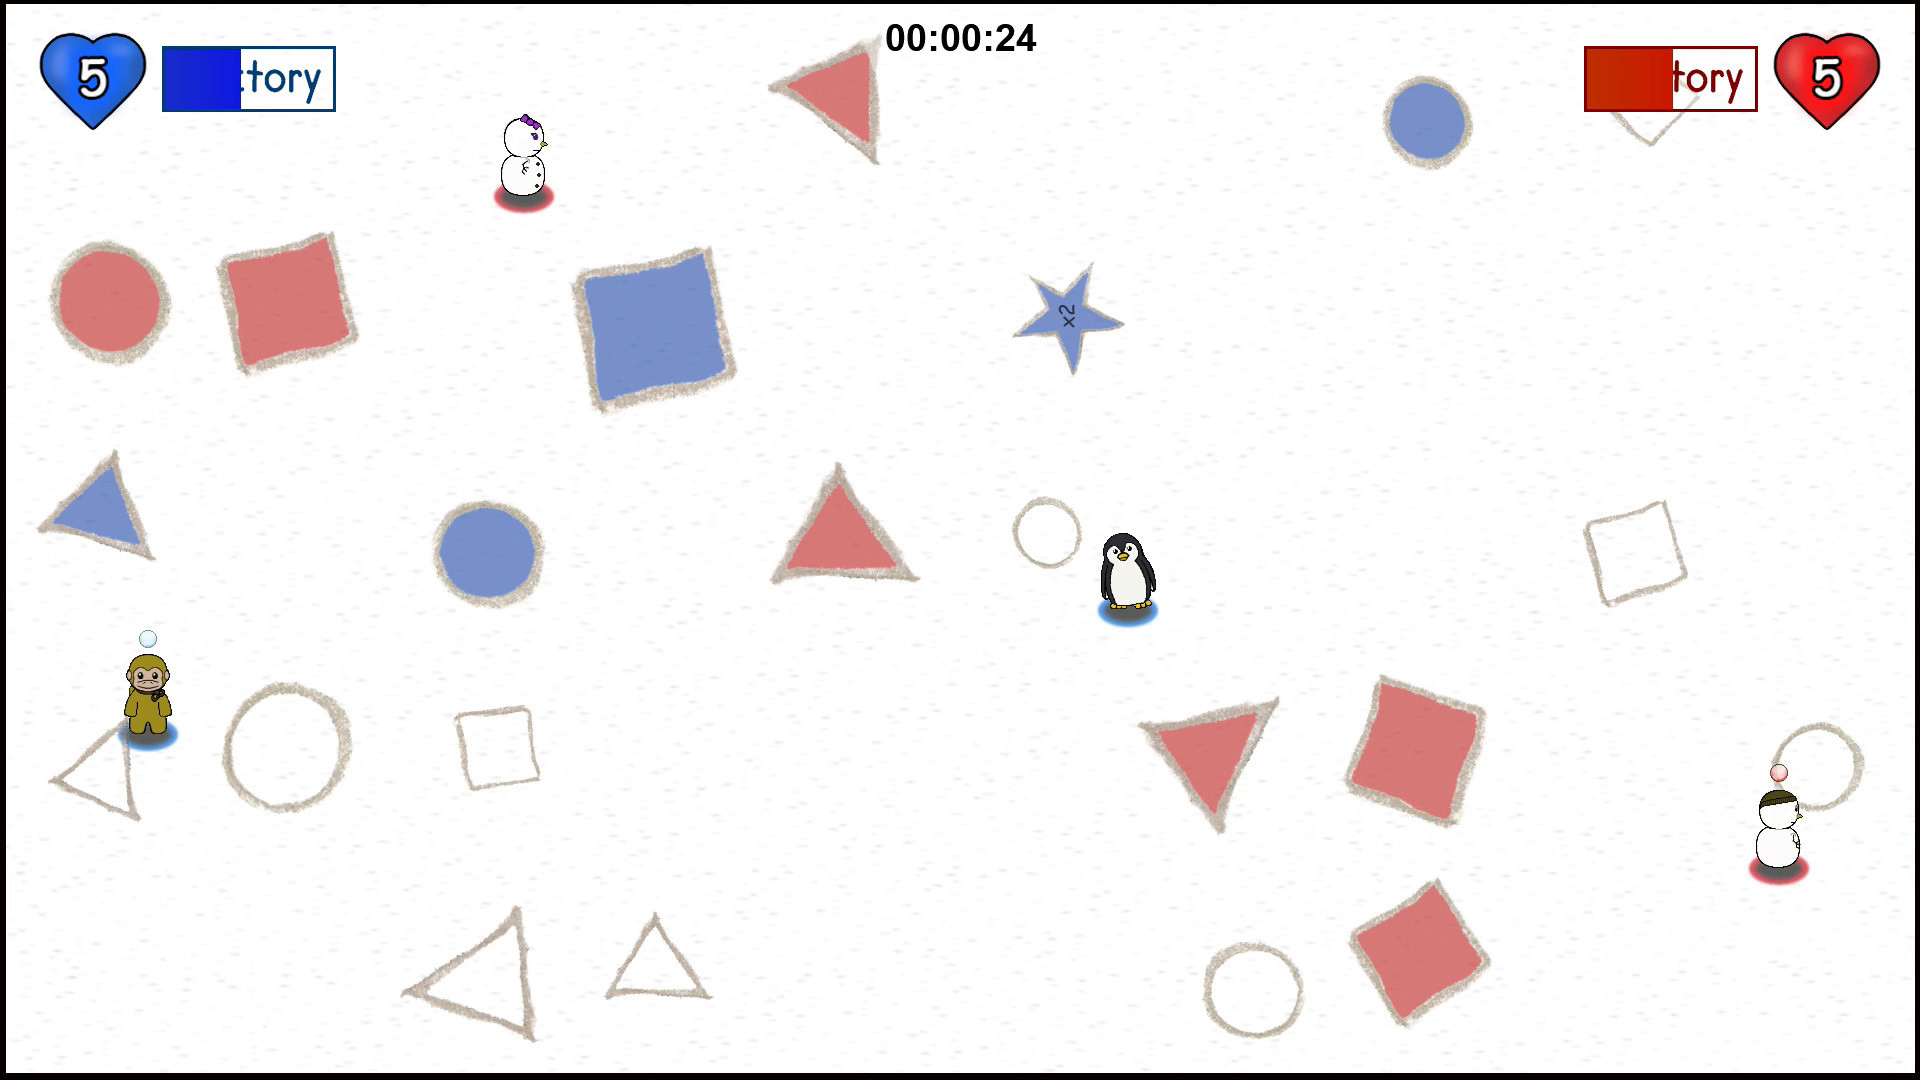 Joey and Penguin's 2 Player Adventure Free Download